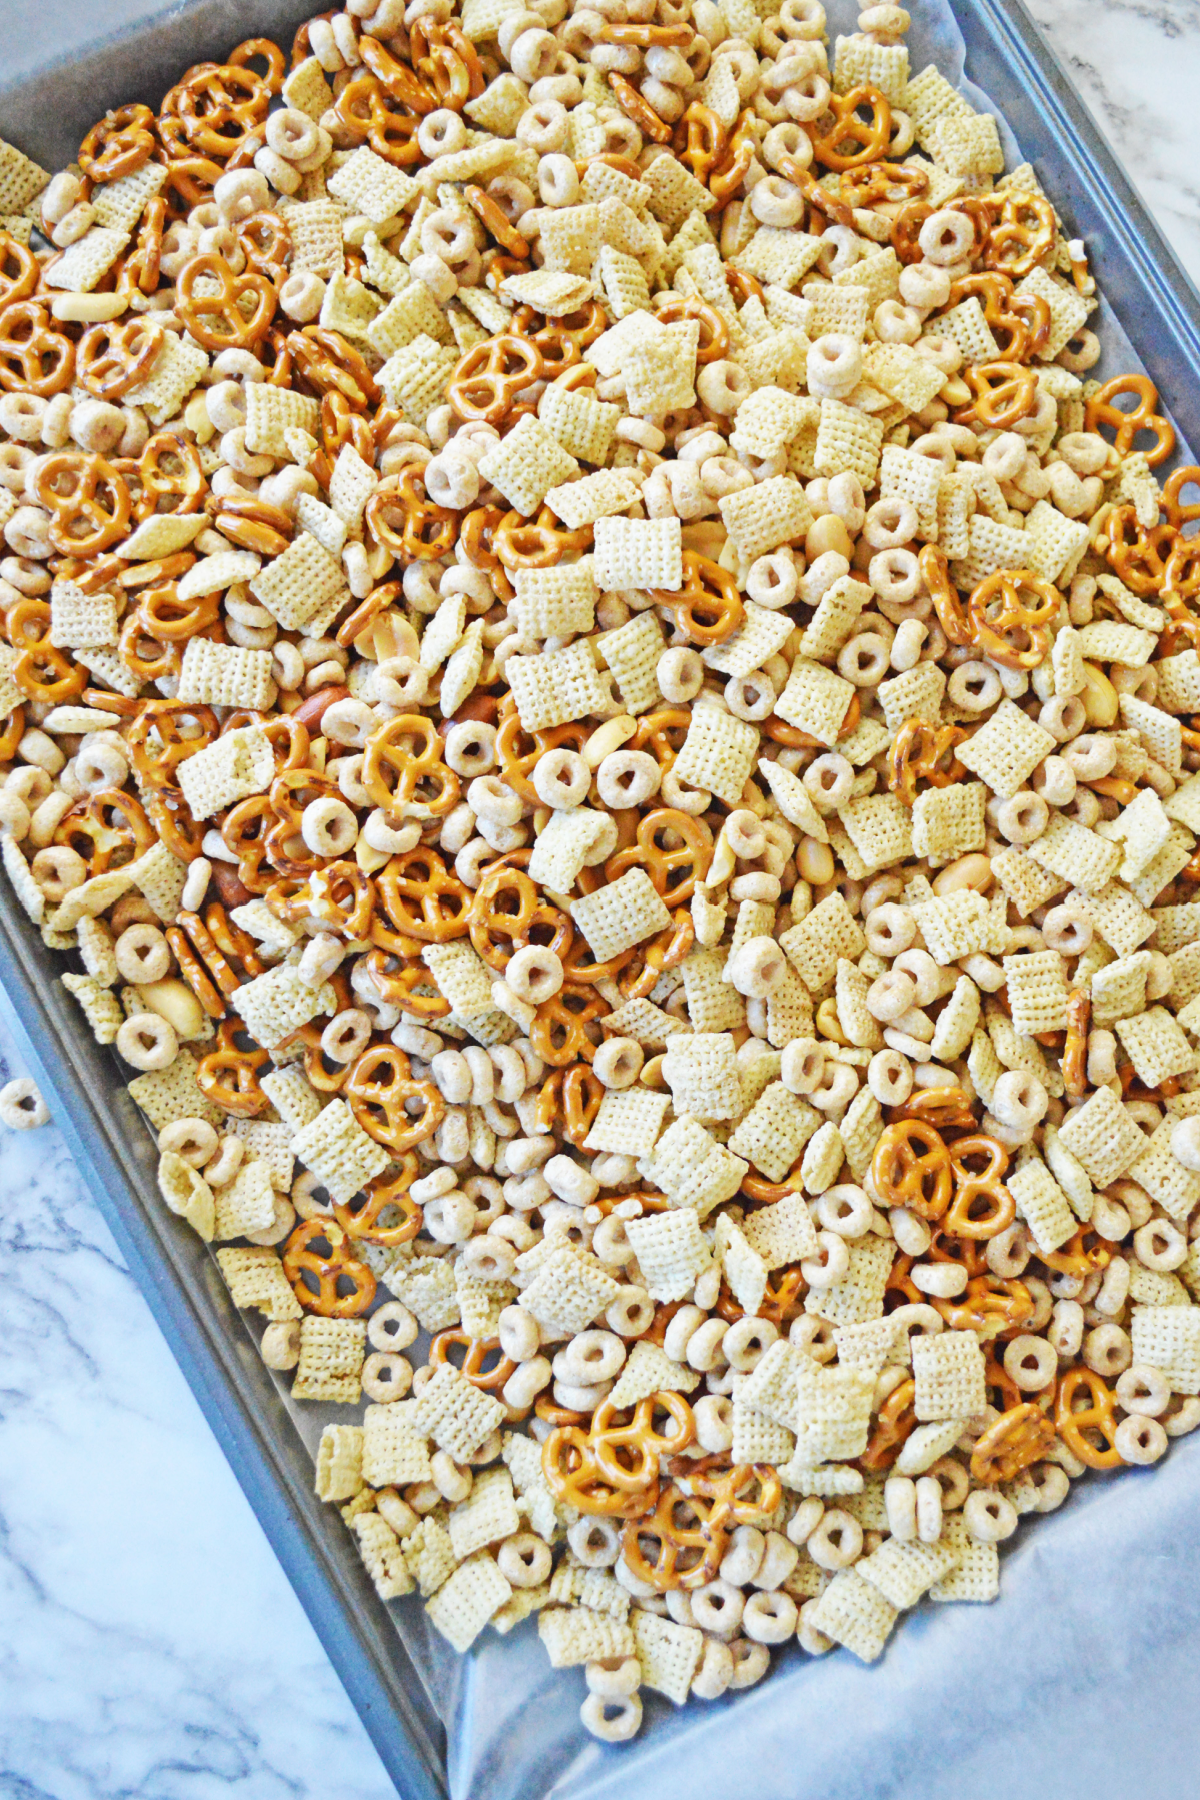 Snack mix with Chex cereal